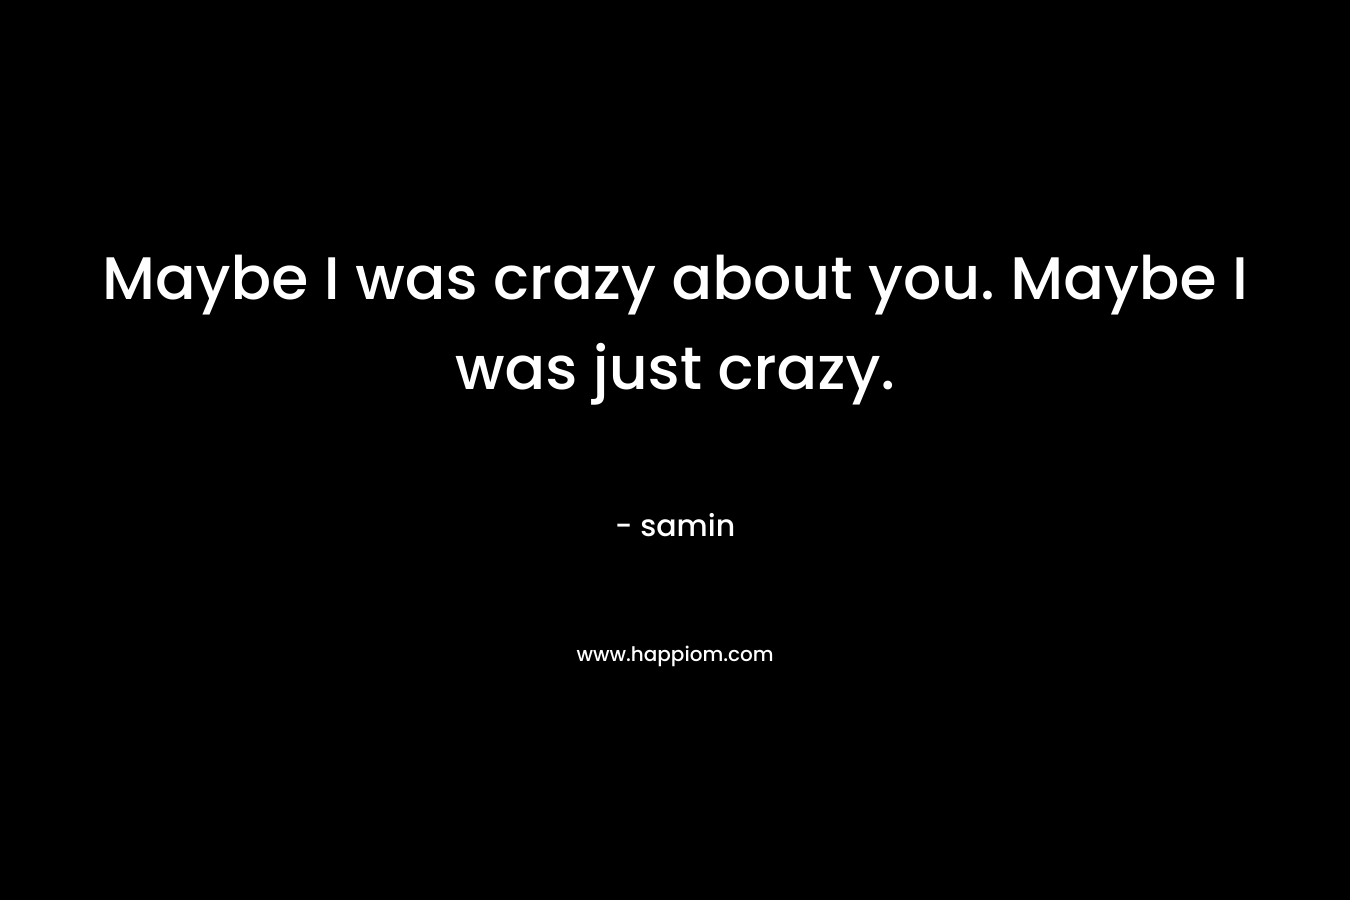 Maybe I was crazy about you. Maybe I was just crazy. – samin